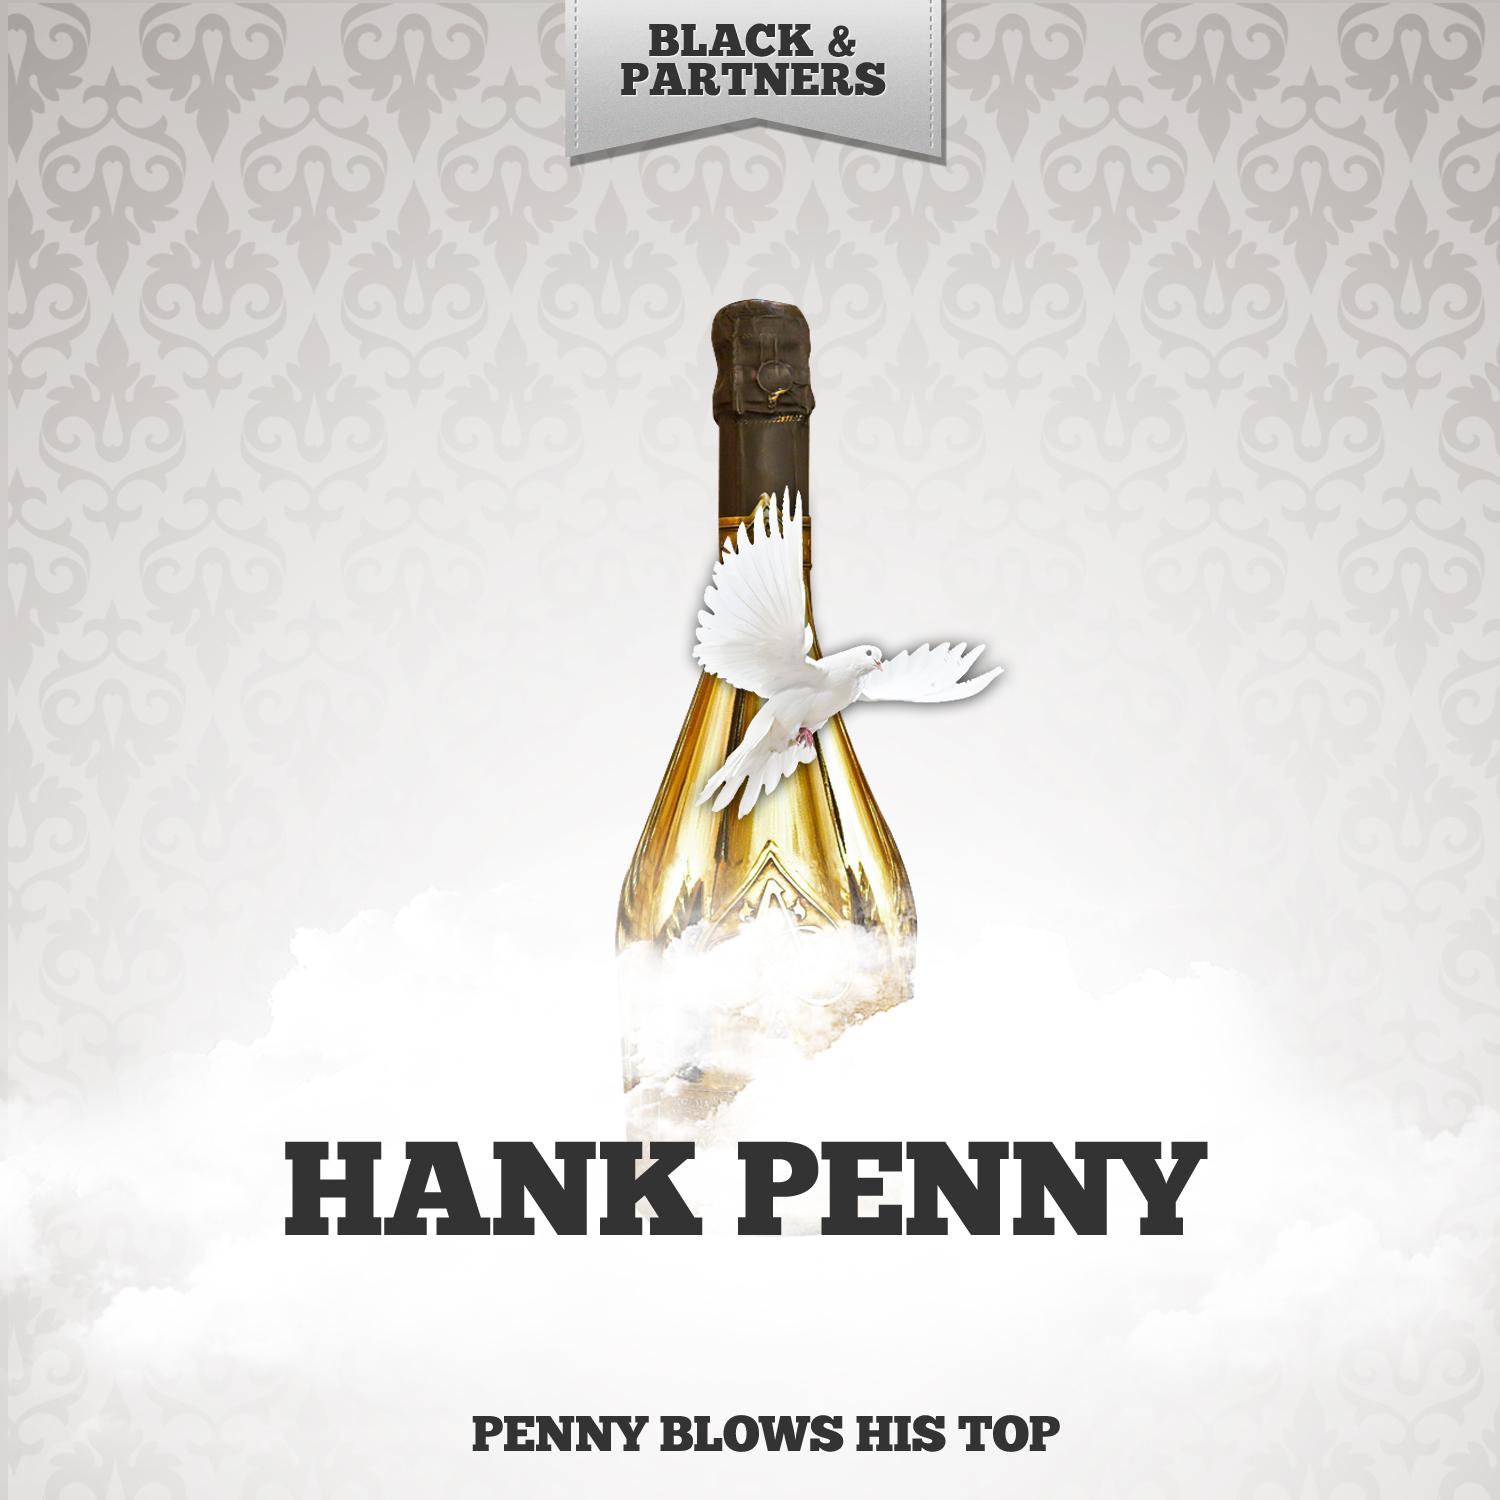 Penny Blows His Top